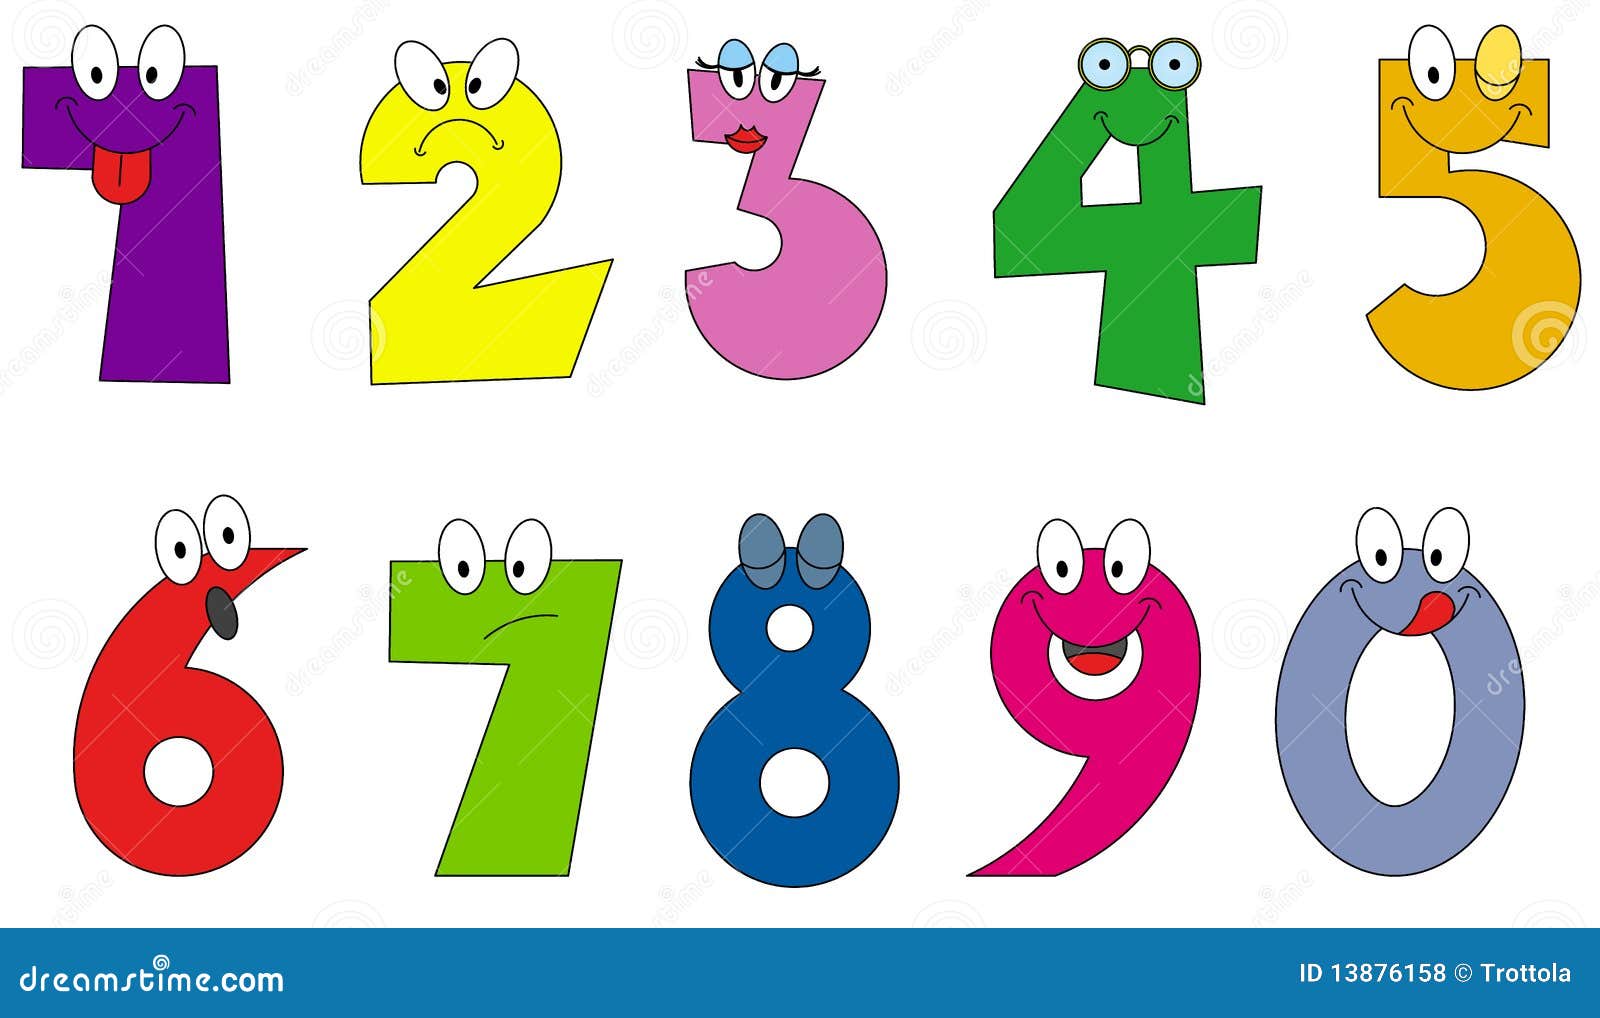 Funny+Numbers+Cartoon+Style+Royalty+Free